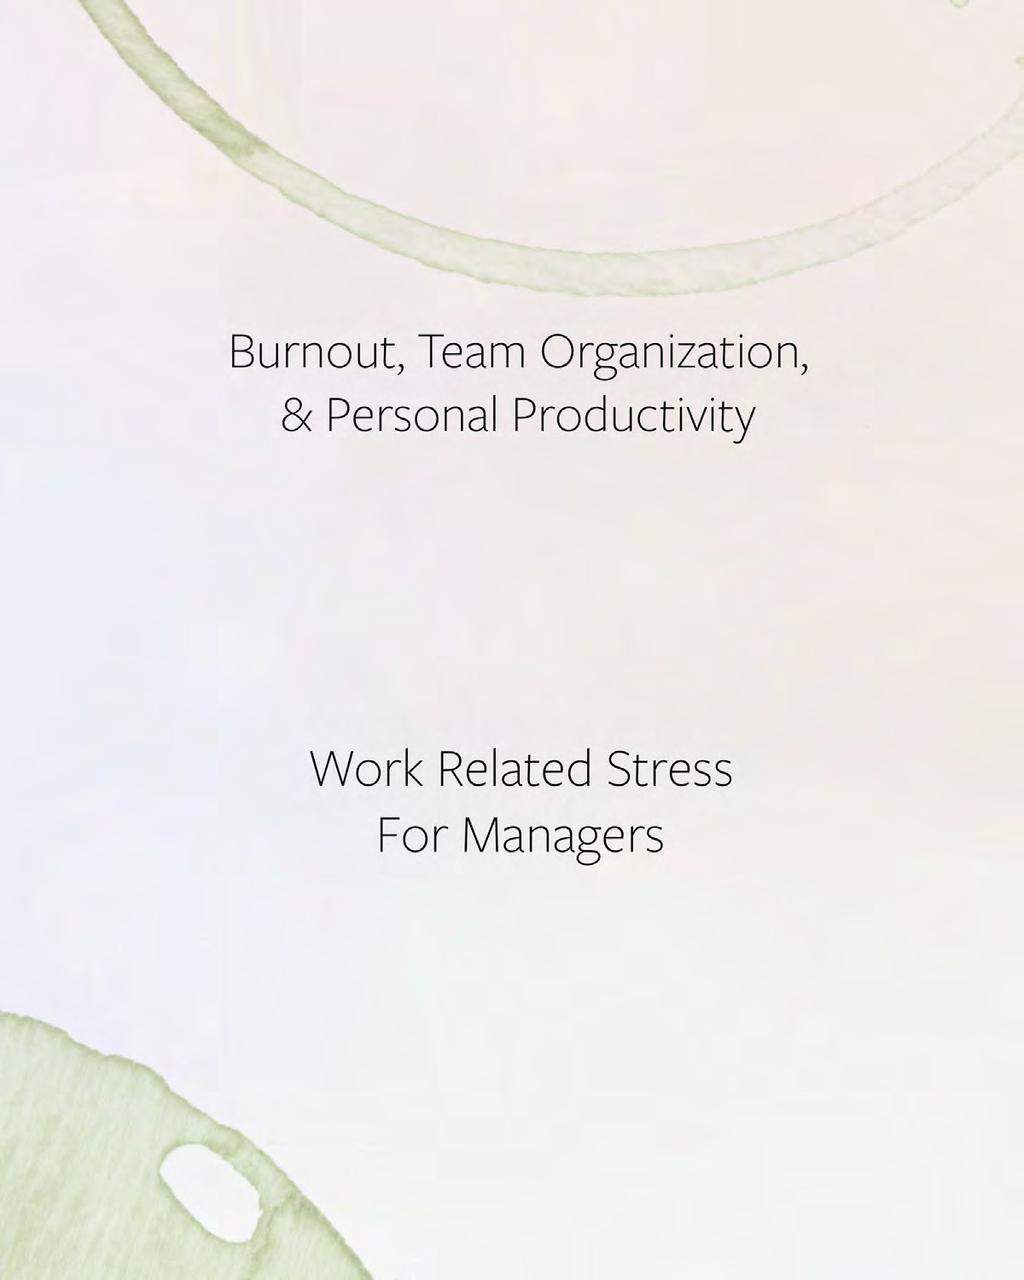 Employees in 4 companies showed reductions in burnout, perceived stress and increases in team and organizational climate, as well as personal productivity performance after 8 weeks of workplace